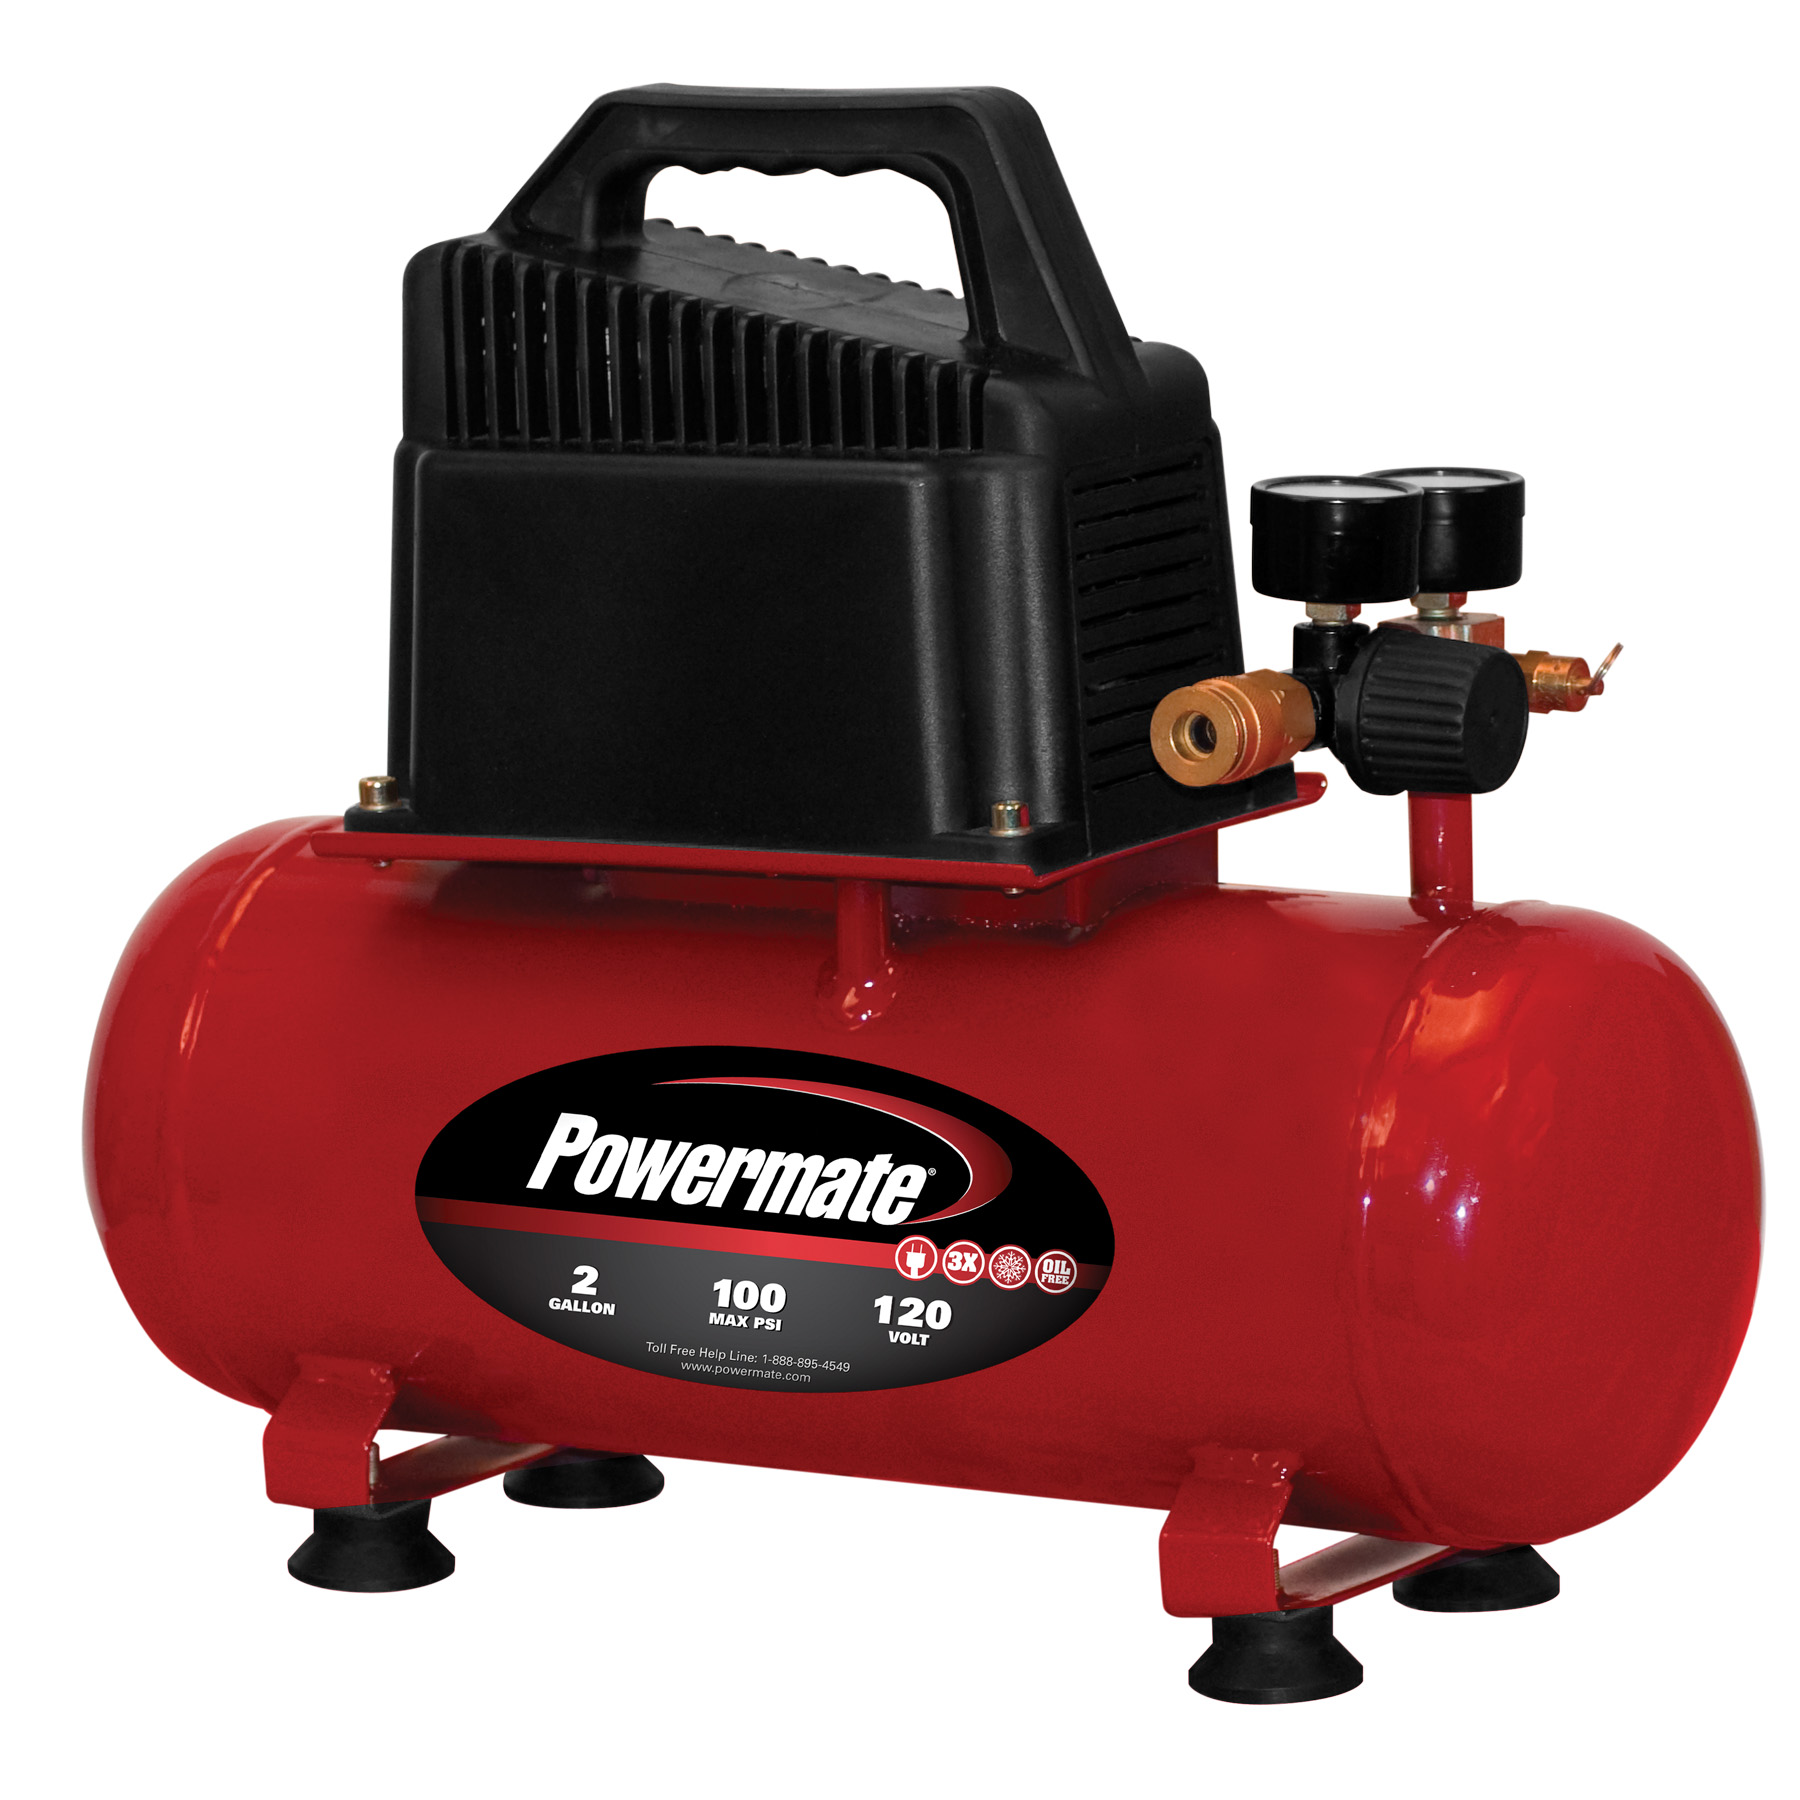 Powermate 2 Gallon Portable Electric Compressor with Extra Value Kit